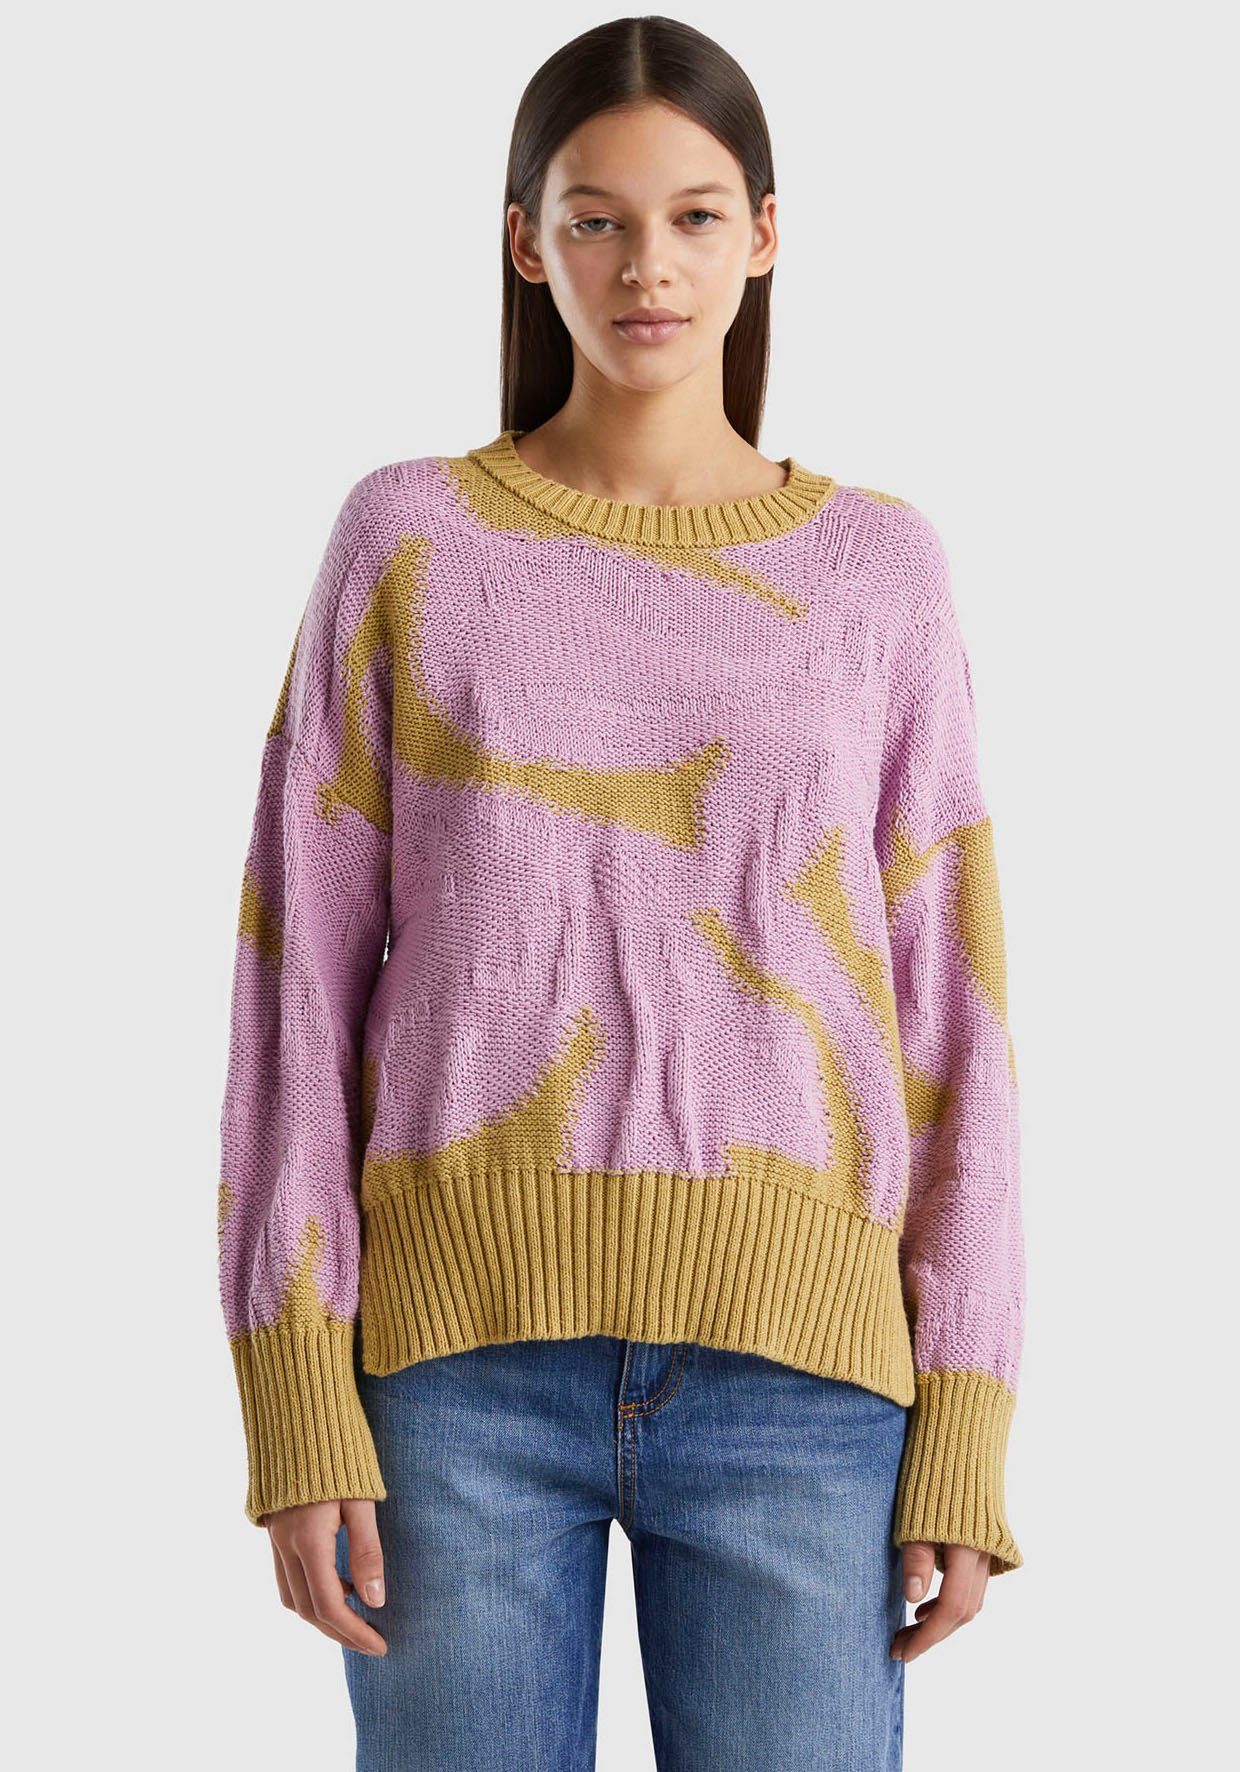 United Colors United of Benetton Strickpullover, von of Benetton Pullover Colors